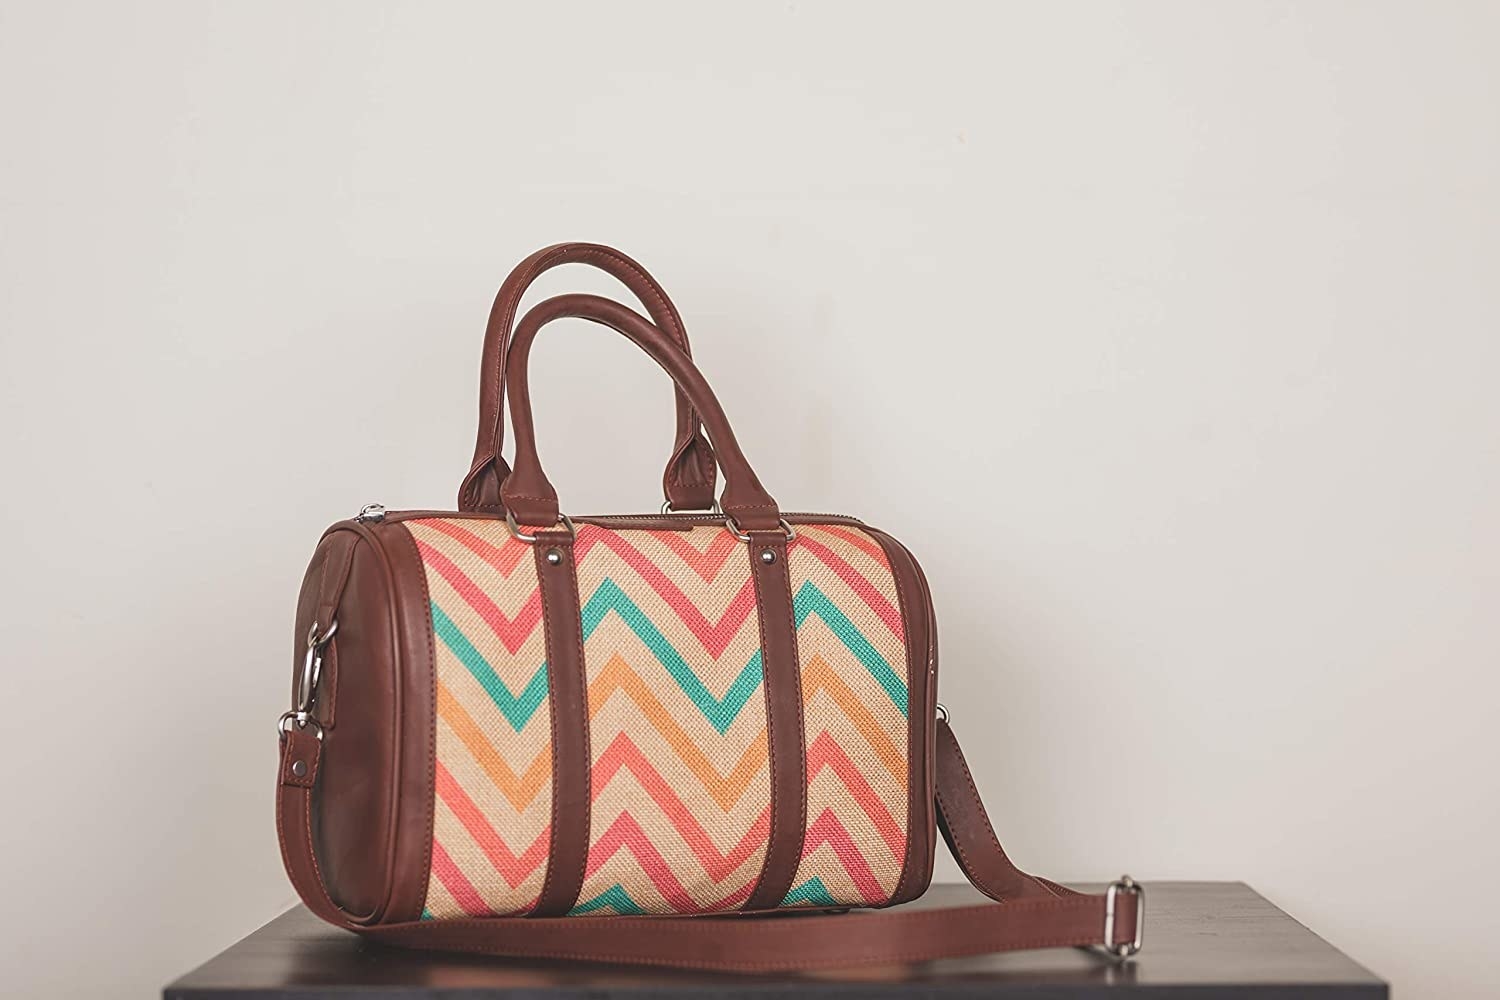 The handmade has brown straps and a colourful zigzag design on its body